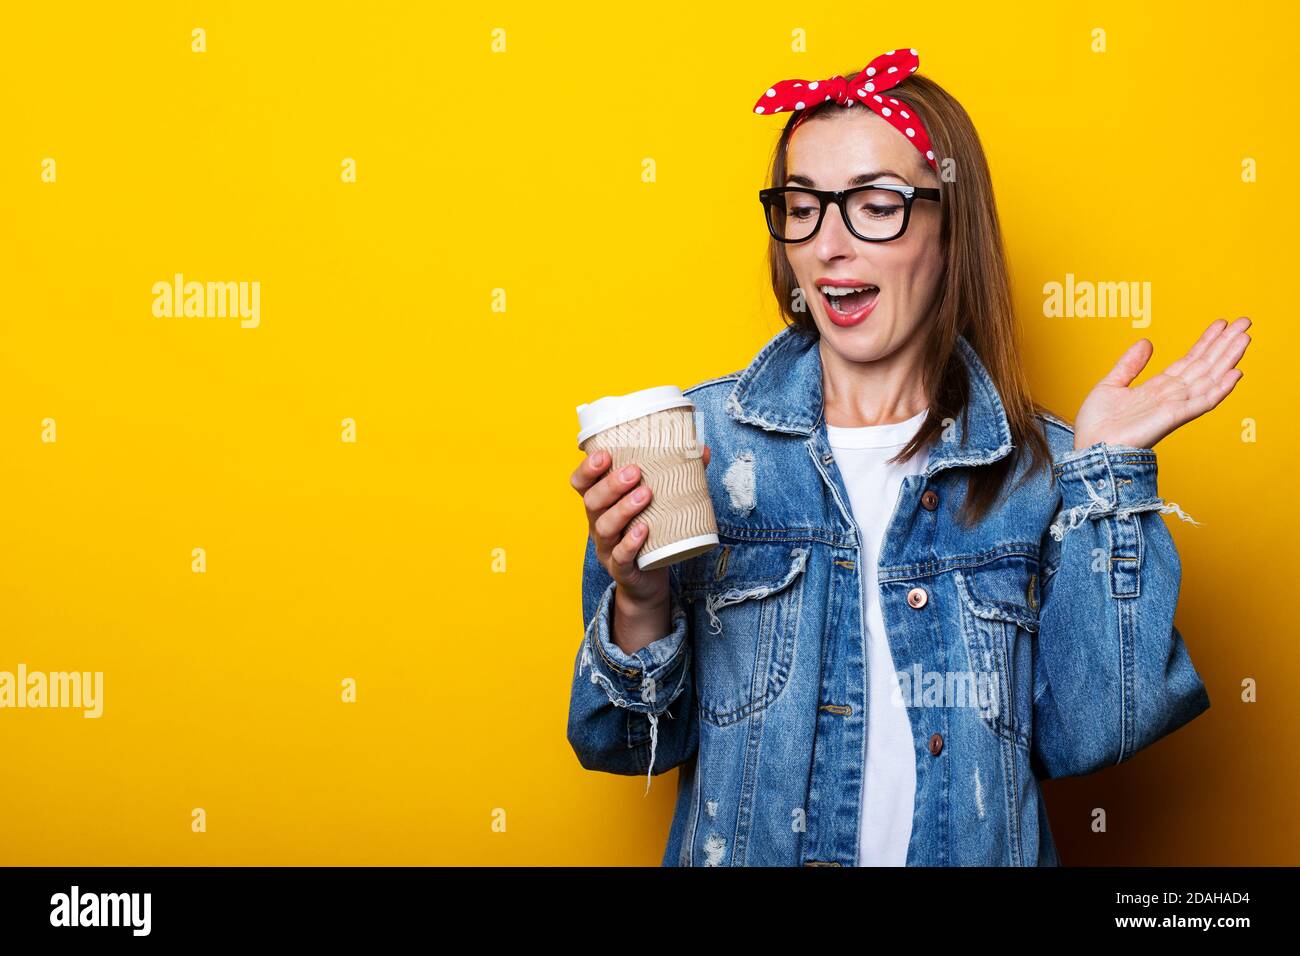 Young woman in denim jacket, headband and glasses looks with surprise at paper cup on yellow background Stock Photo